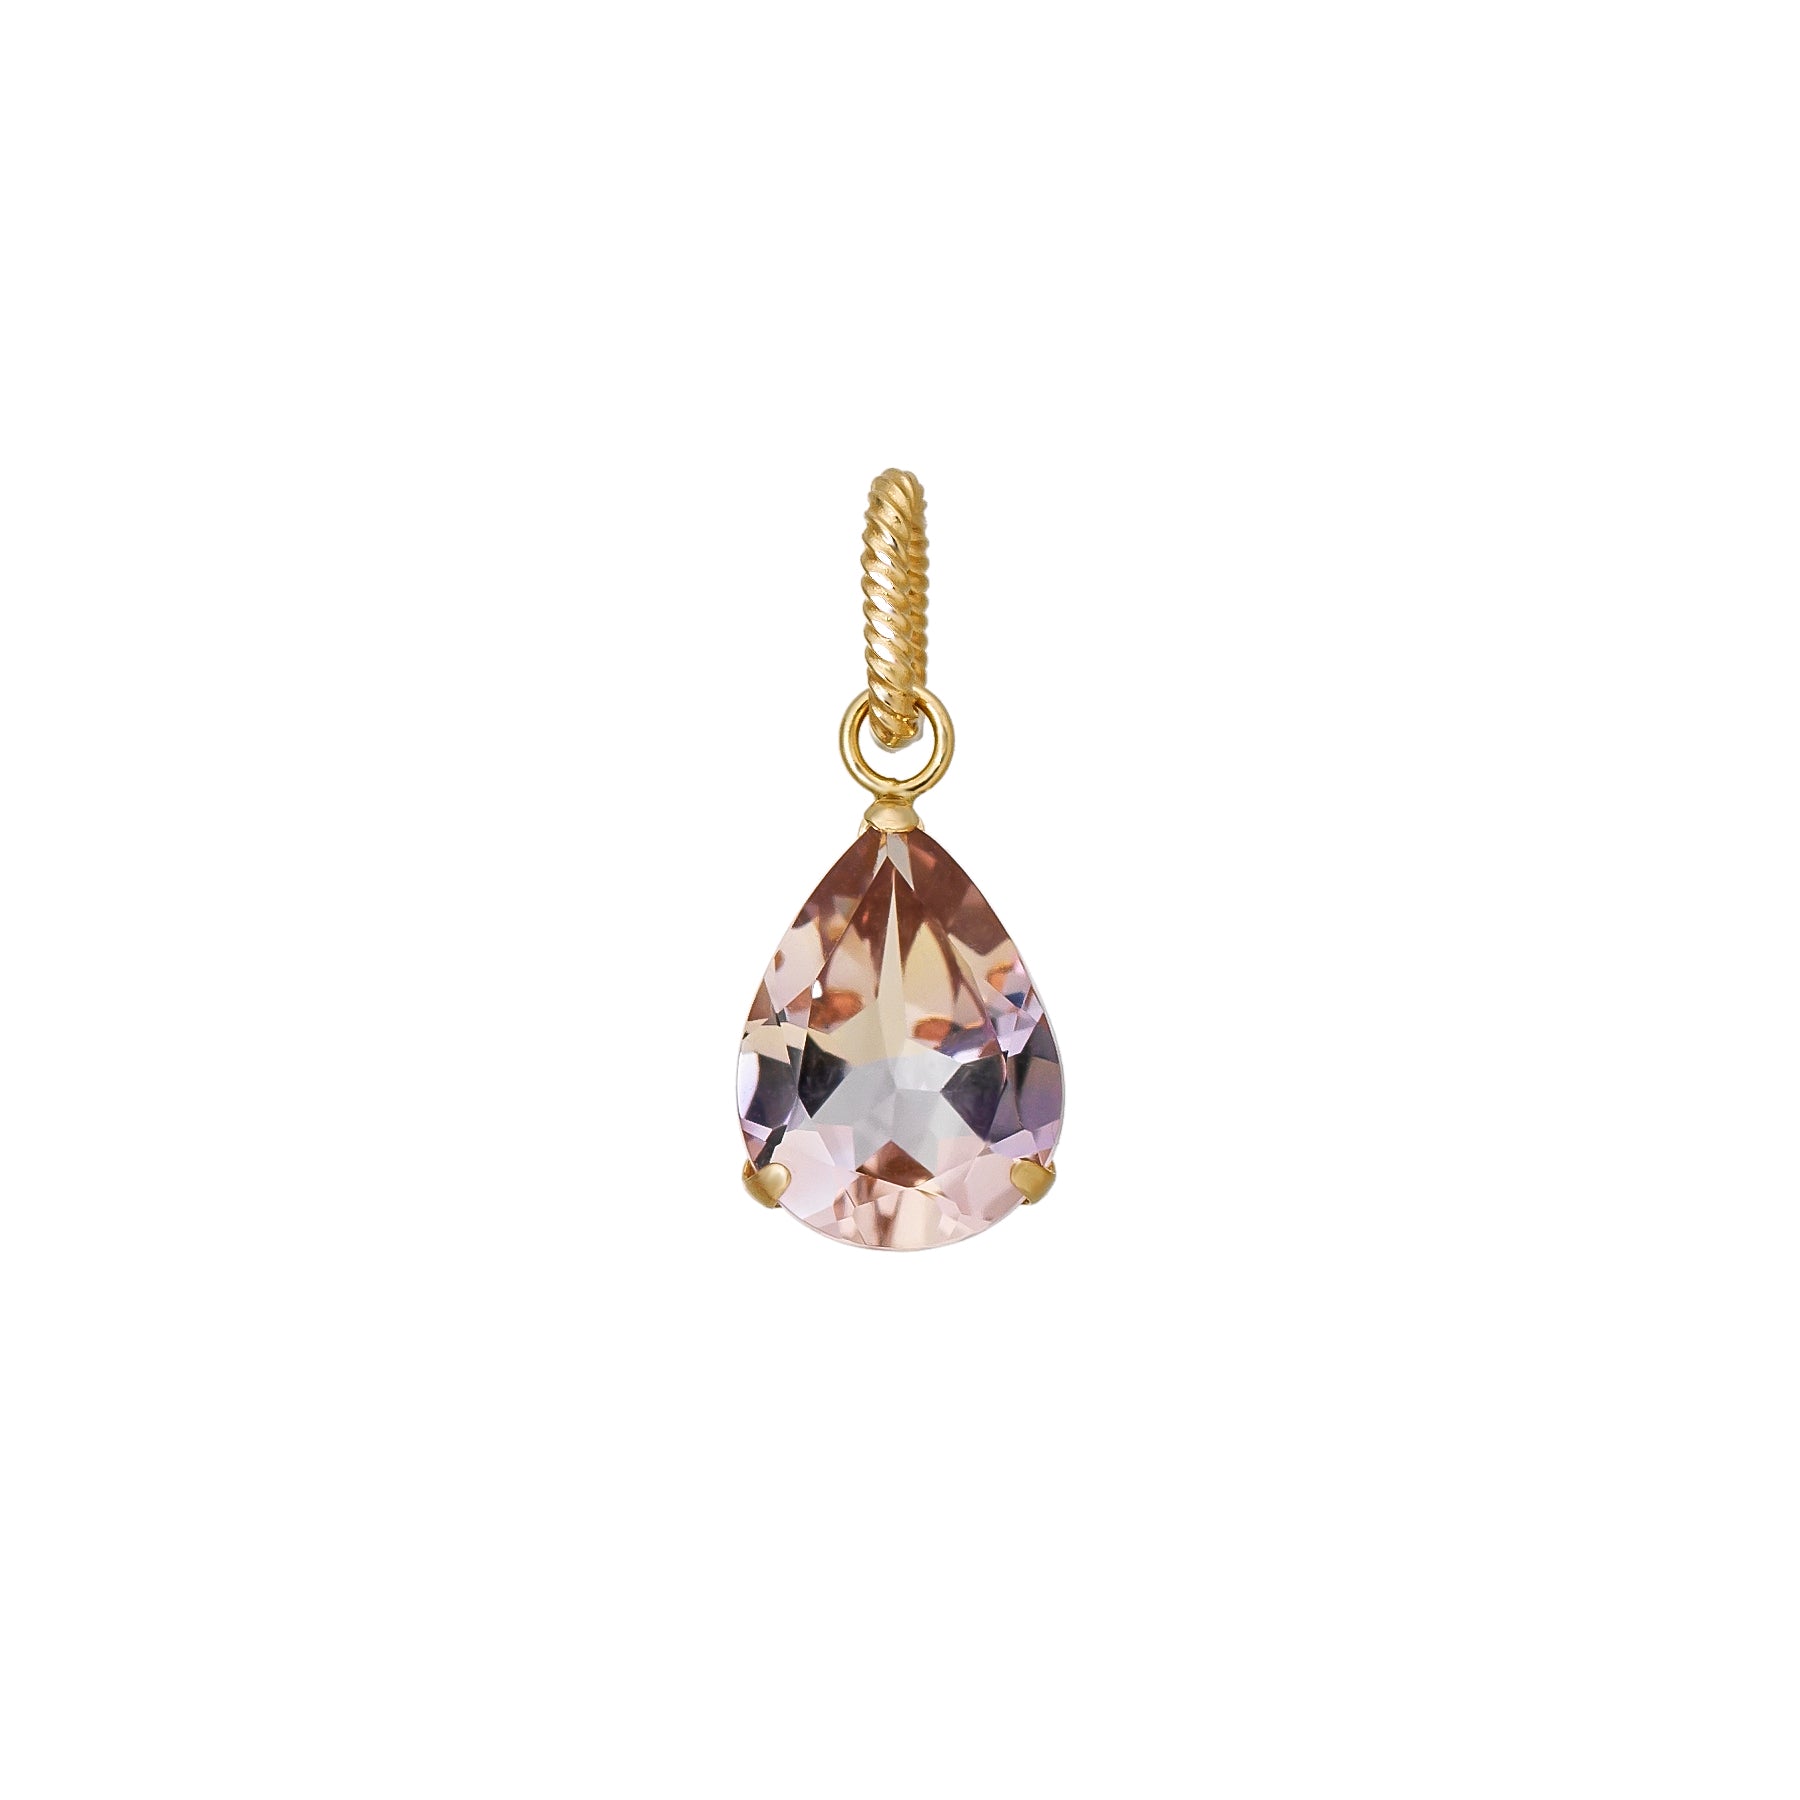 10K Ametrine Drop Necklace Charm (Yellow Gold) - Product Image